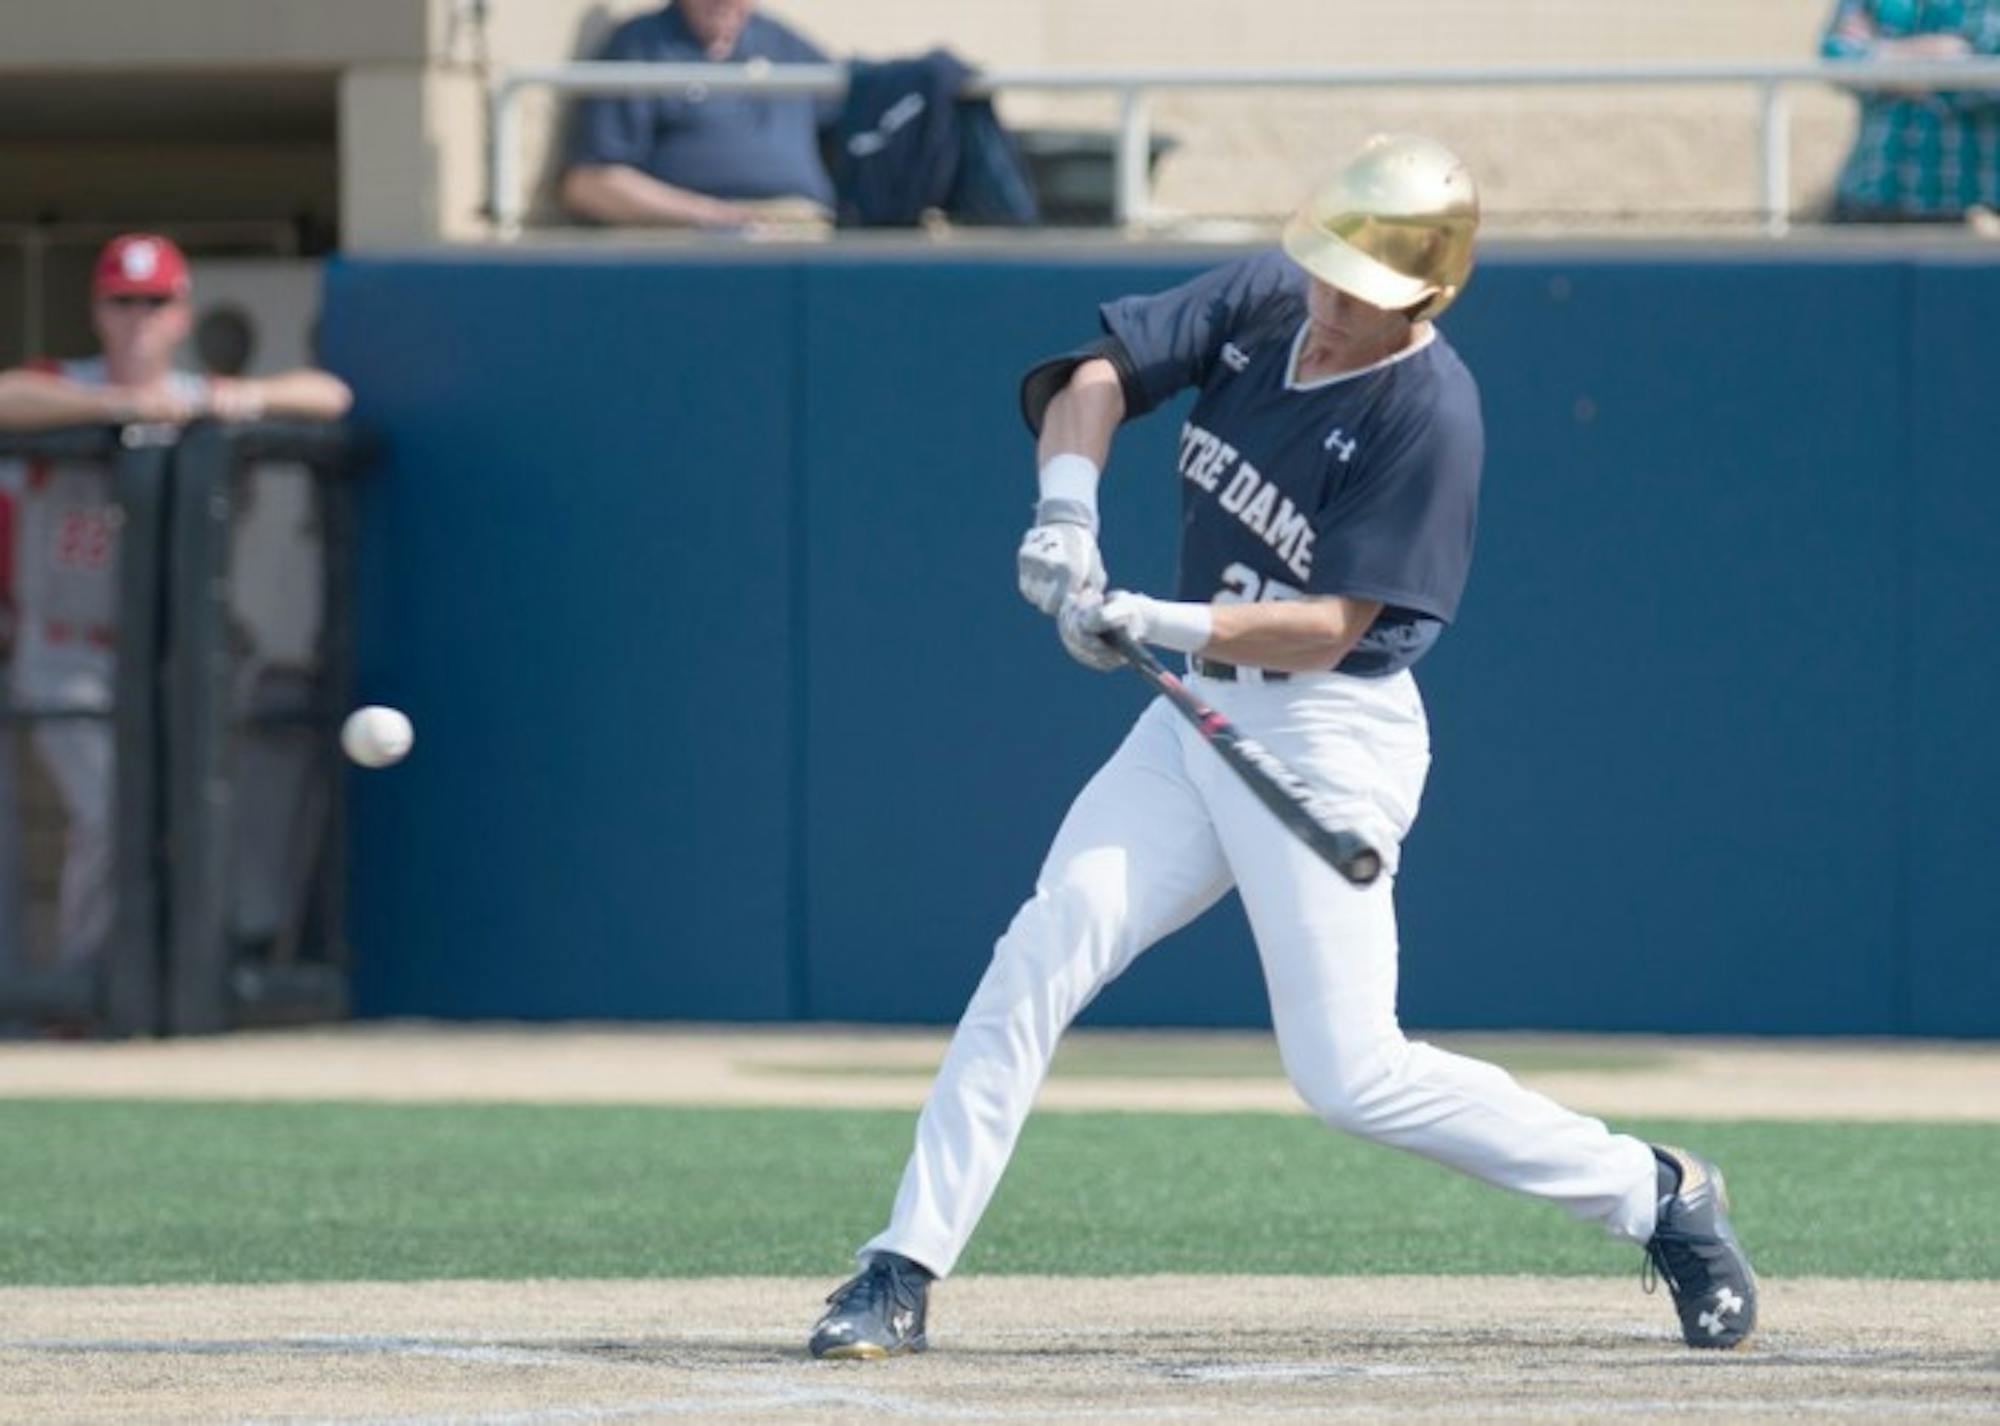 Irish senior outfielder Robert Youngdahl looks to connect on a pitch during a 4-2 loss to North Carolina State at Frank Eck Stadium on April 18. Youngdahl is second on the team with 26 runs batted in.